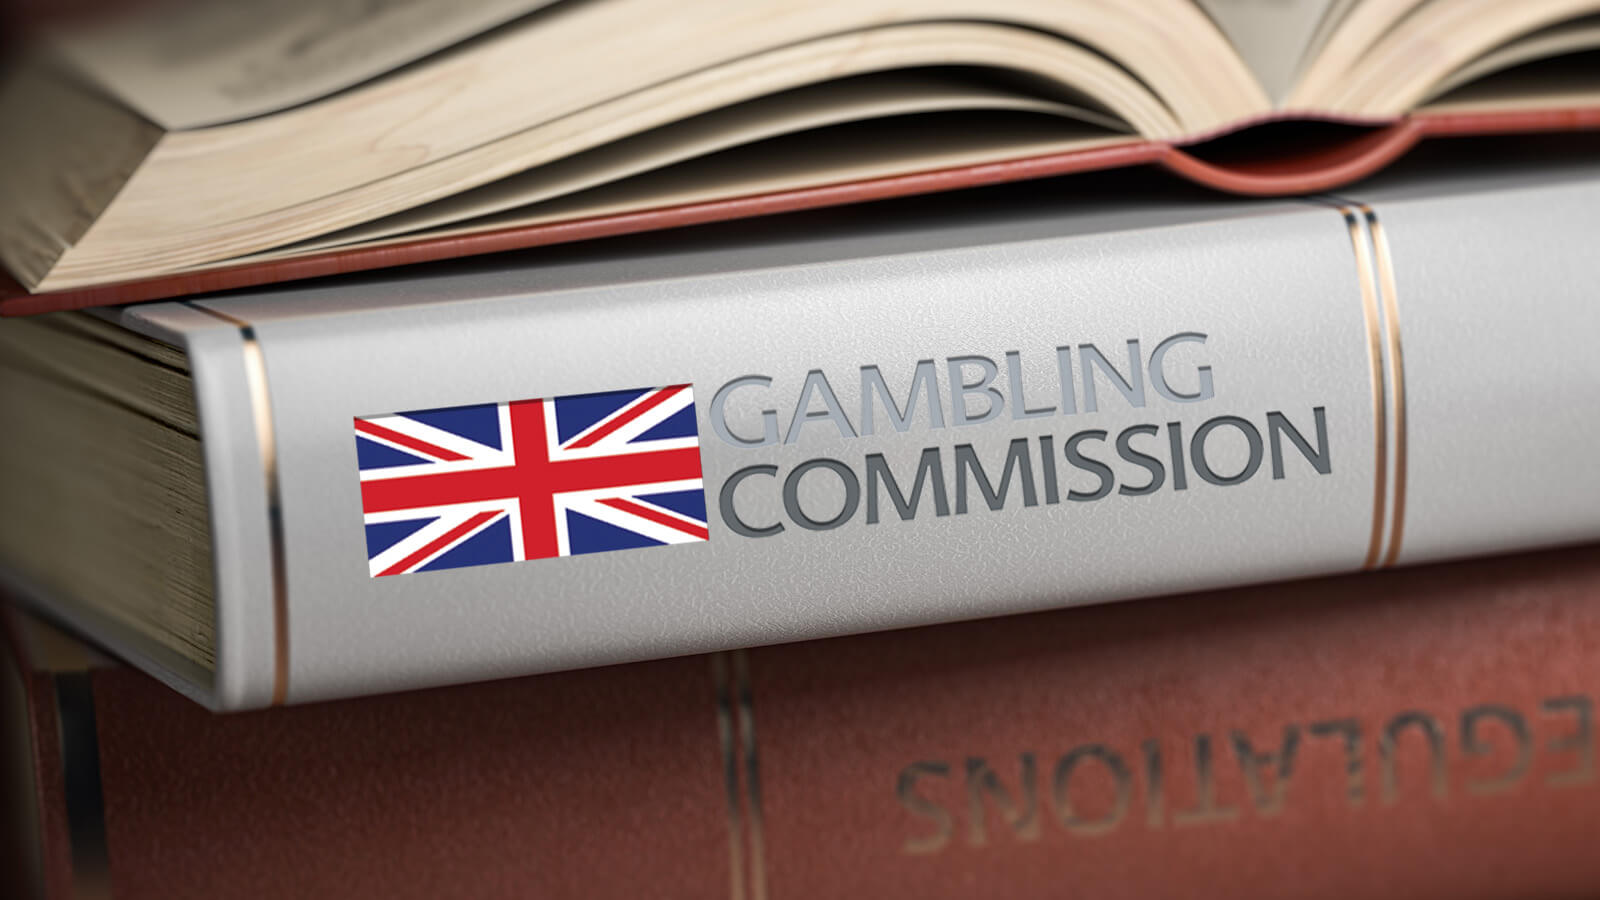 How the UKGC's Regulations on Online Casinos Affect You